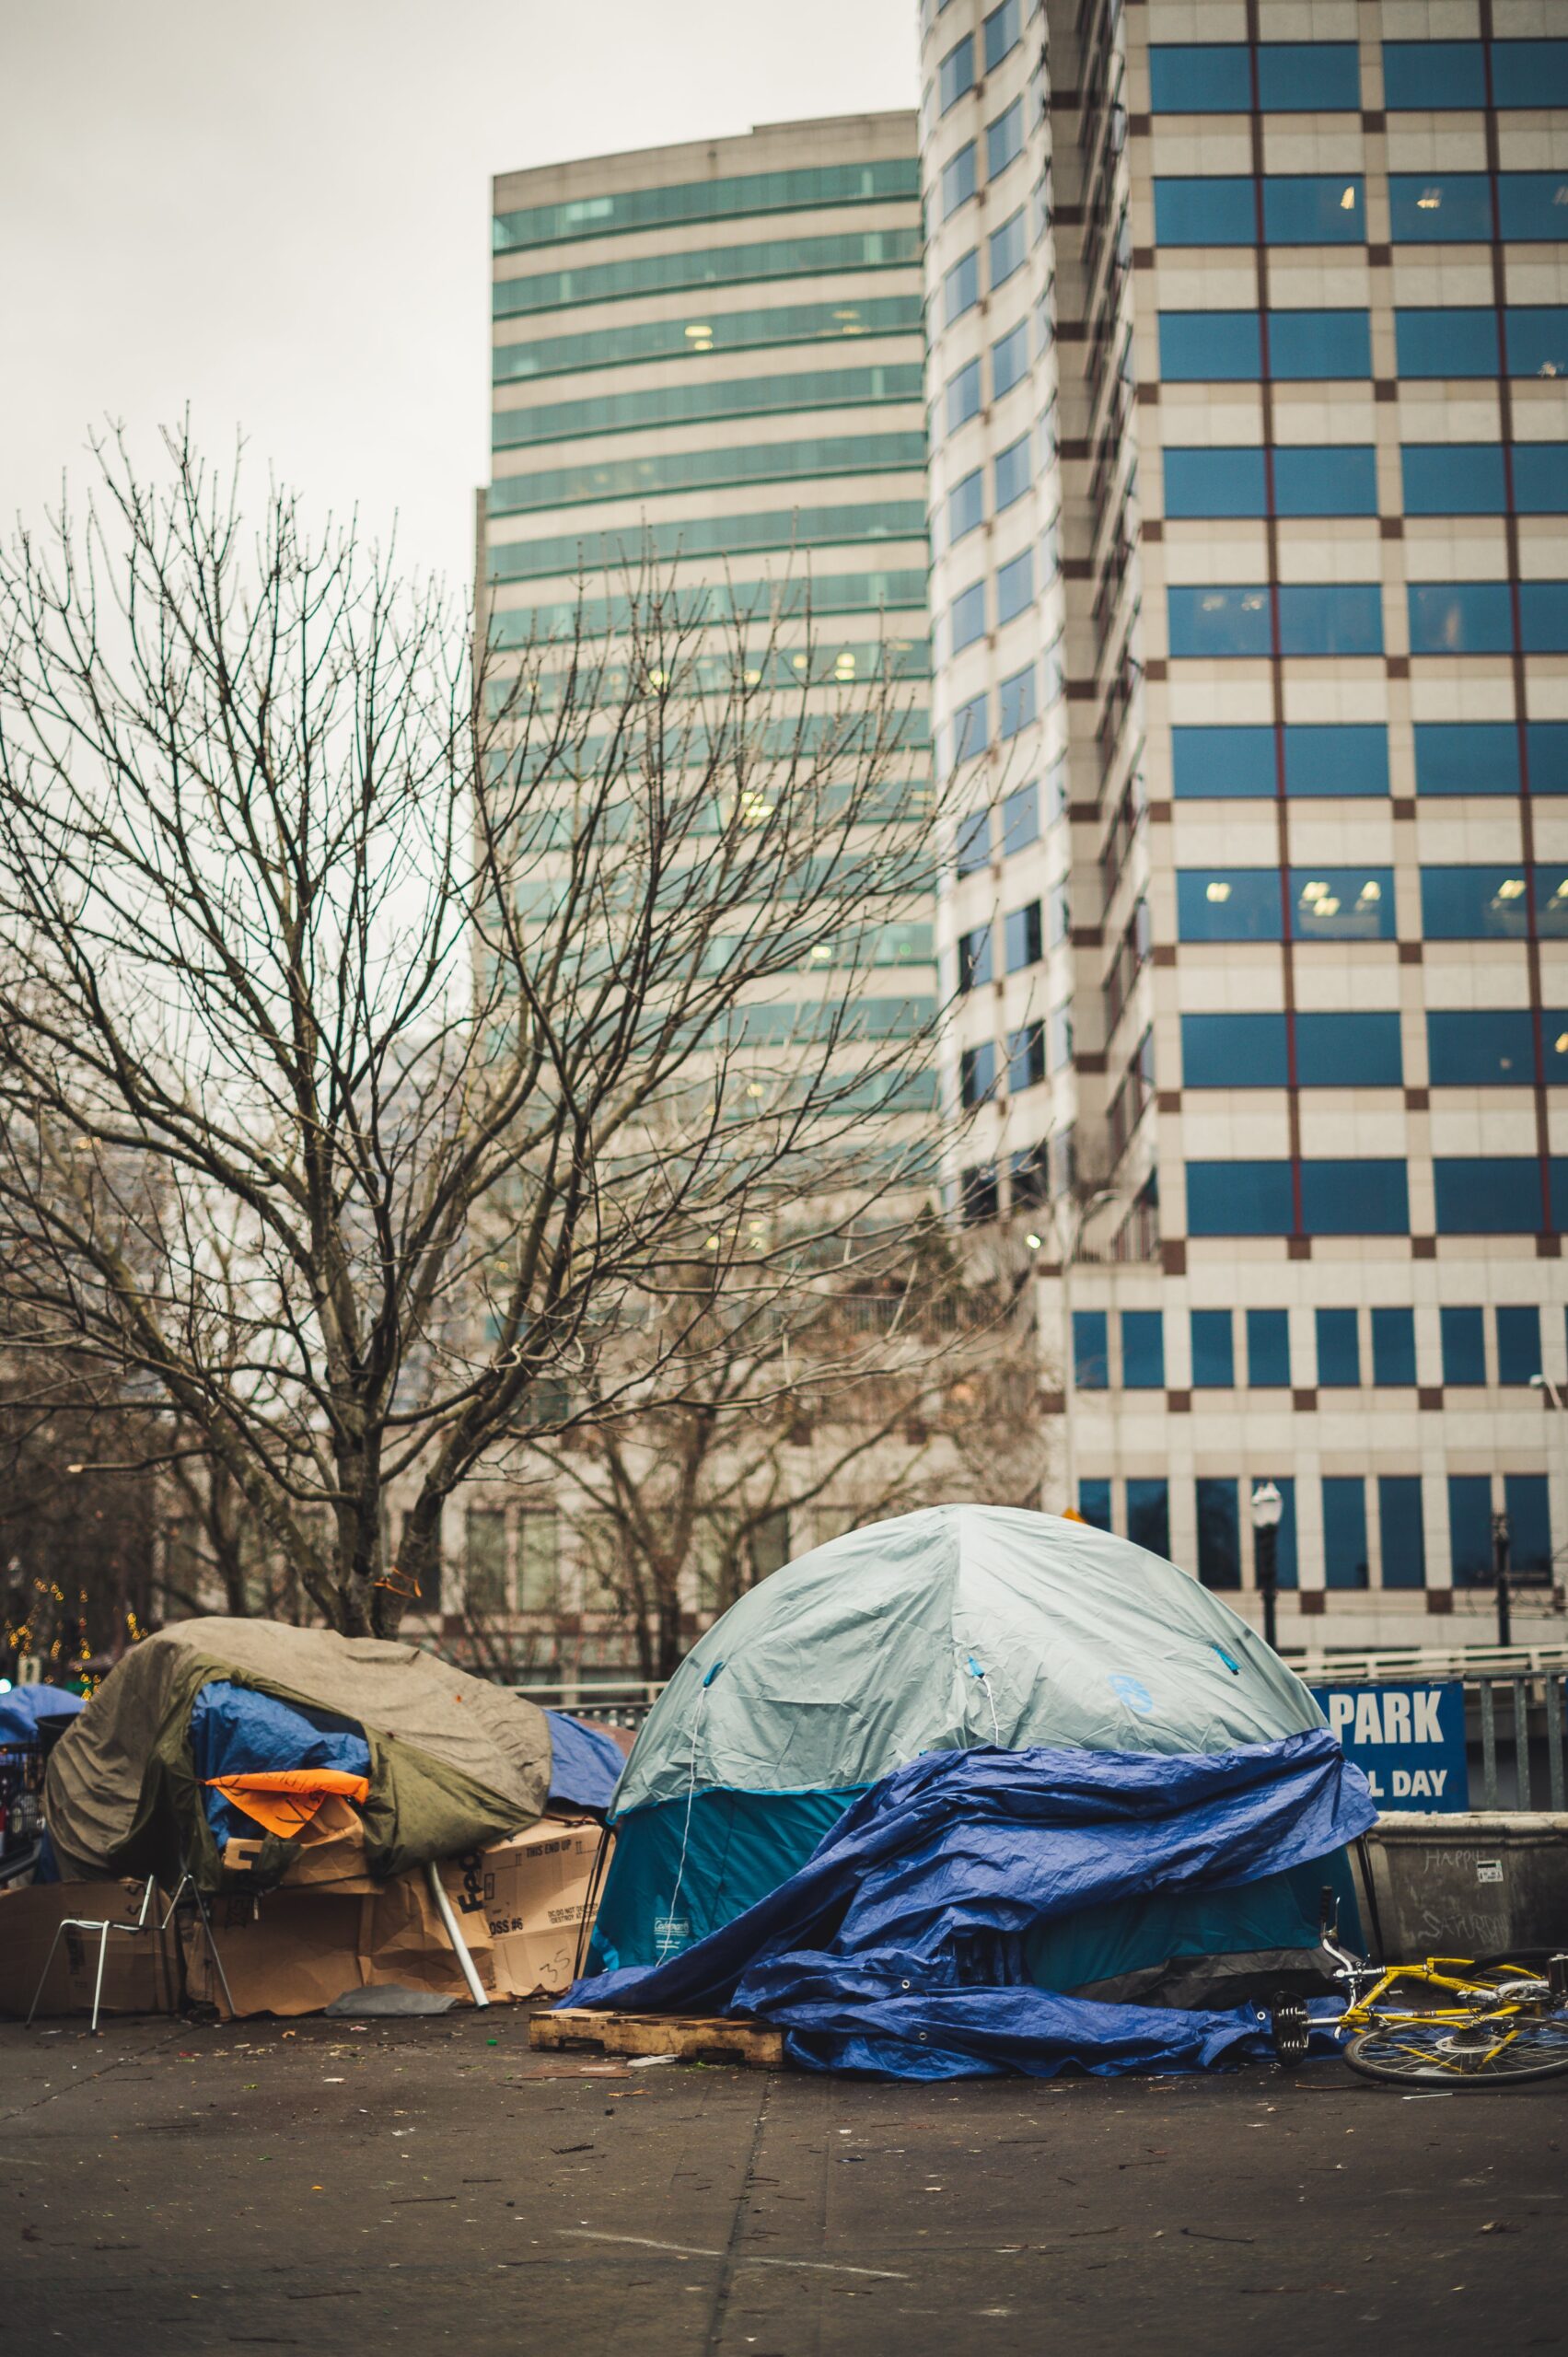 Tents on city street in front of two tall buildings